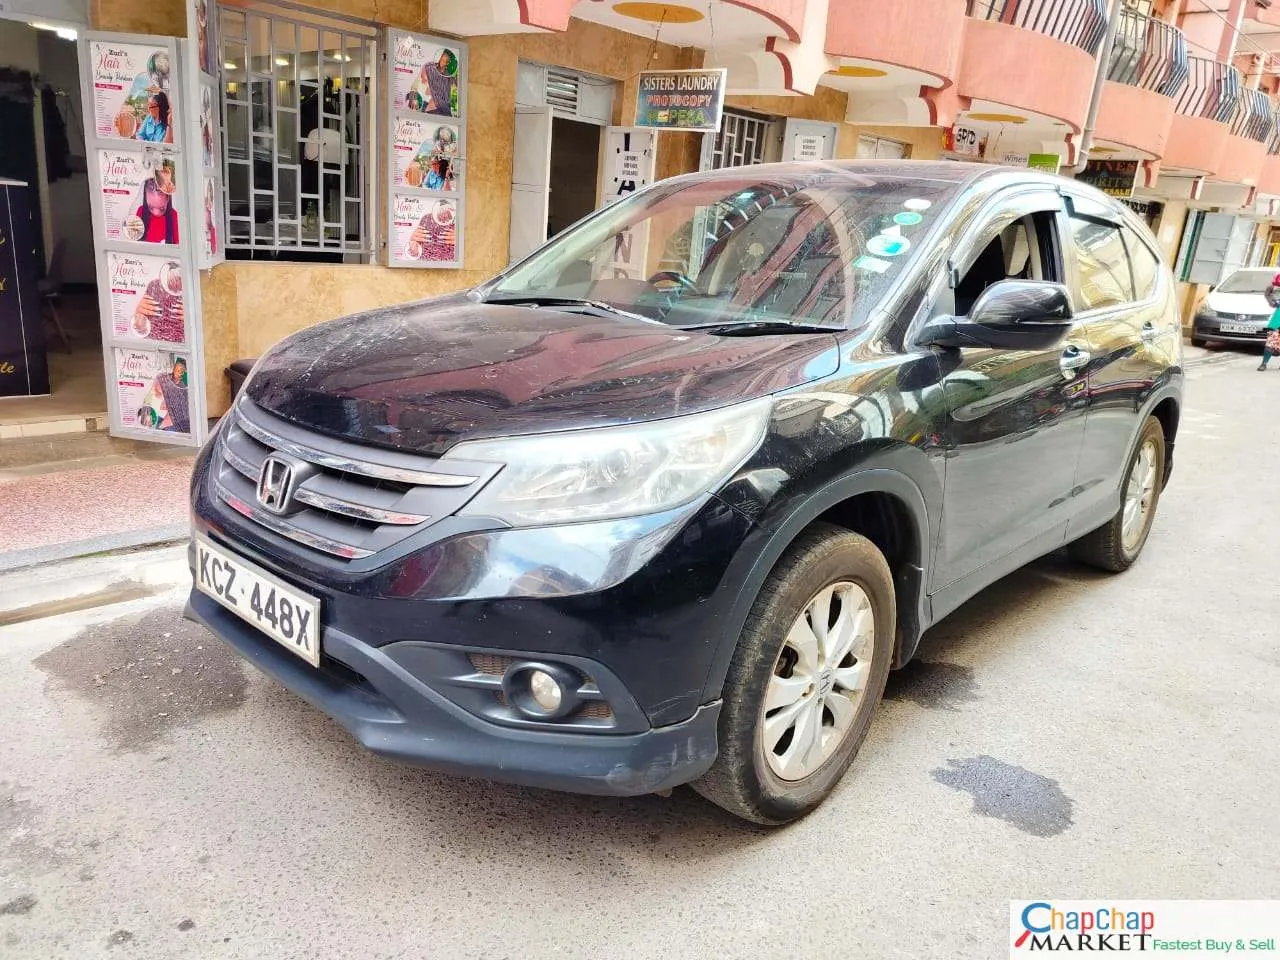 Honda CR-V for sale in kenya You Pay 30% Deposit Trade in OK crv hire purchase installments as NEW